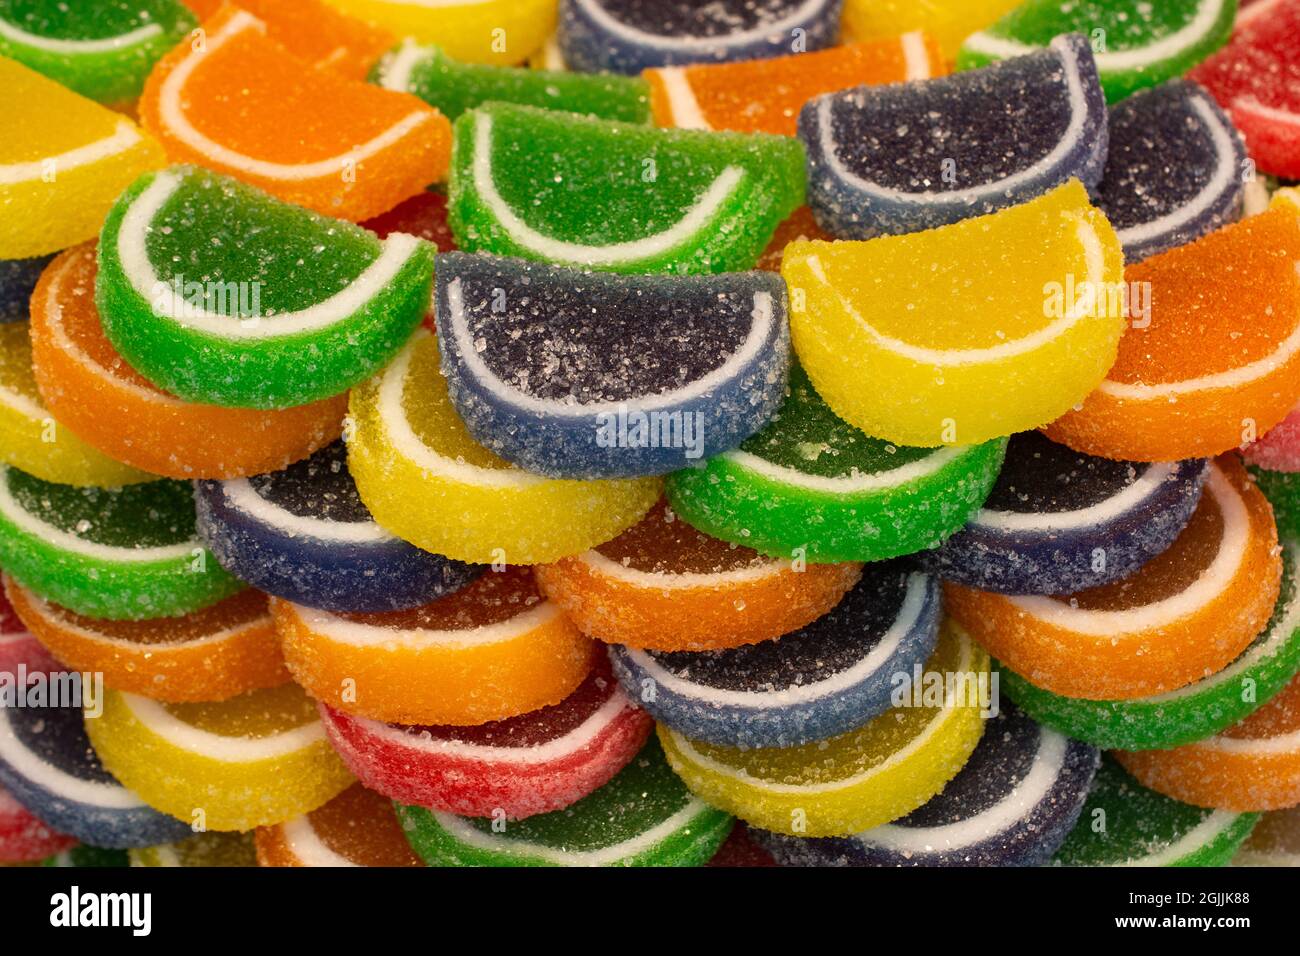 Closeup shot of arranged differently colored marmalade Stock Photo